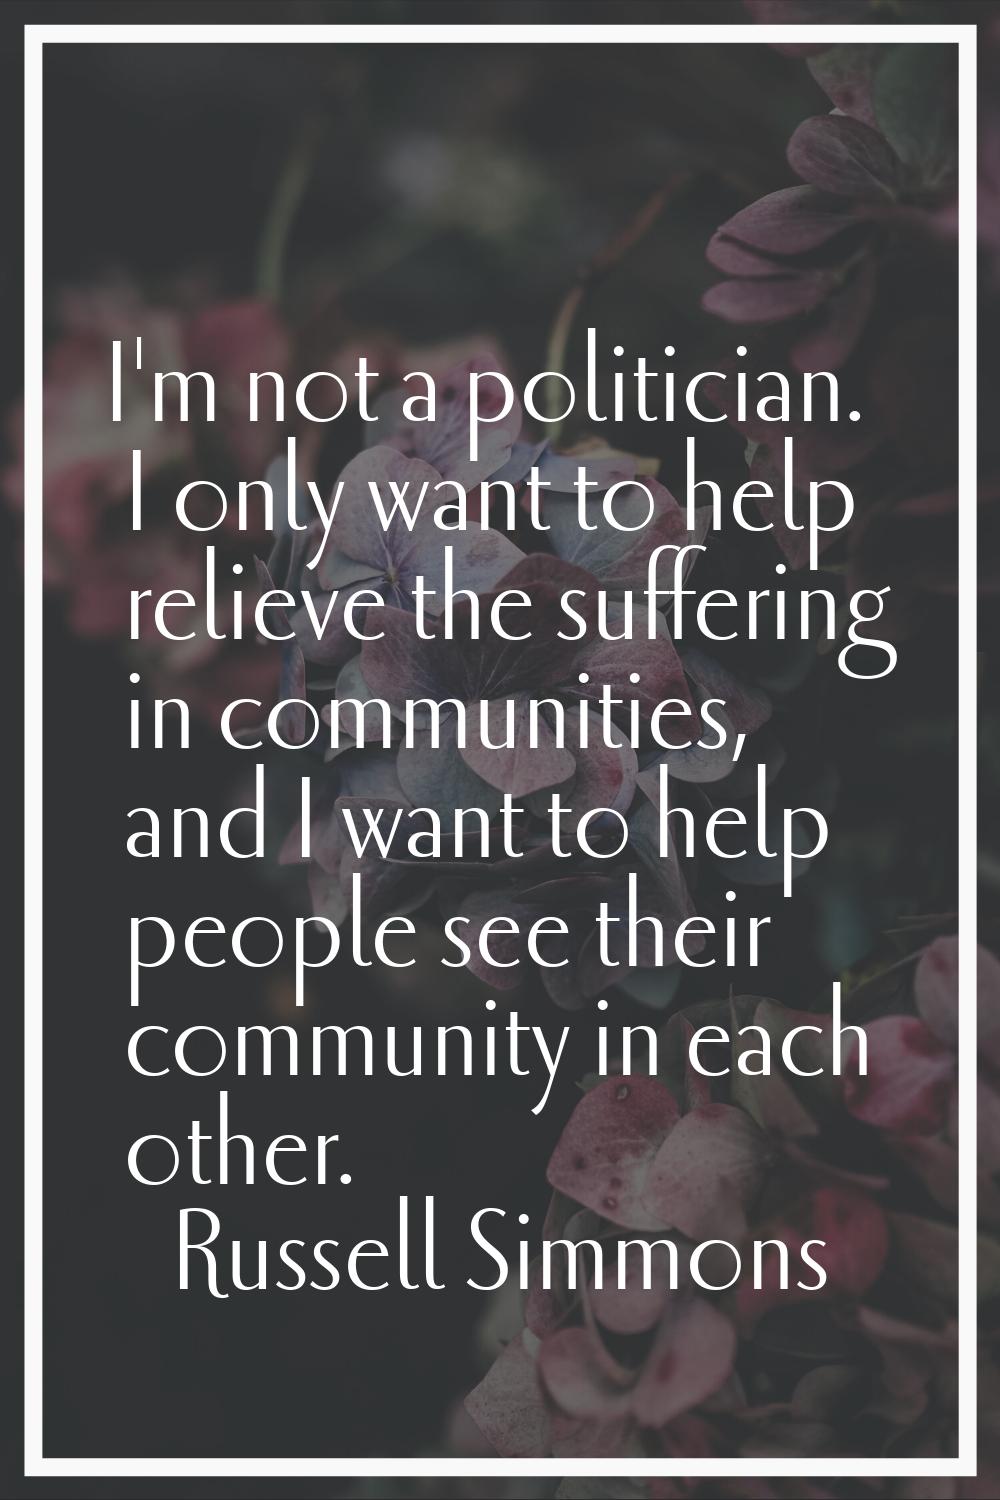 I'm not a politician. I only want to help relieve the suffering in communities, and I want to help 